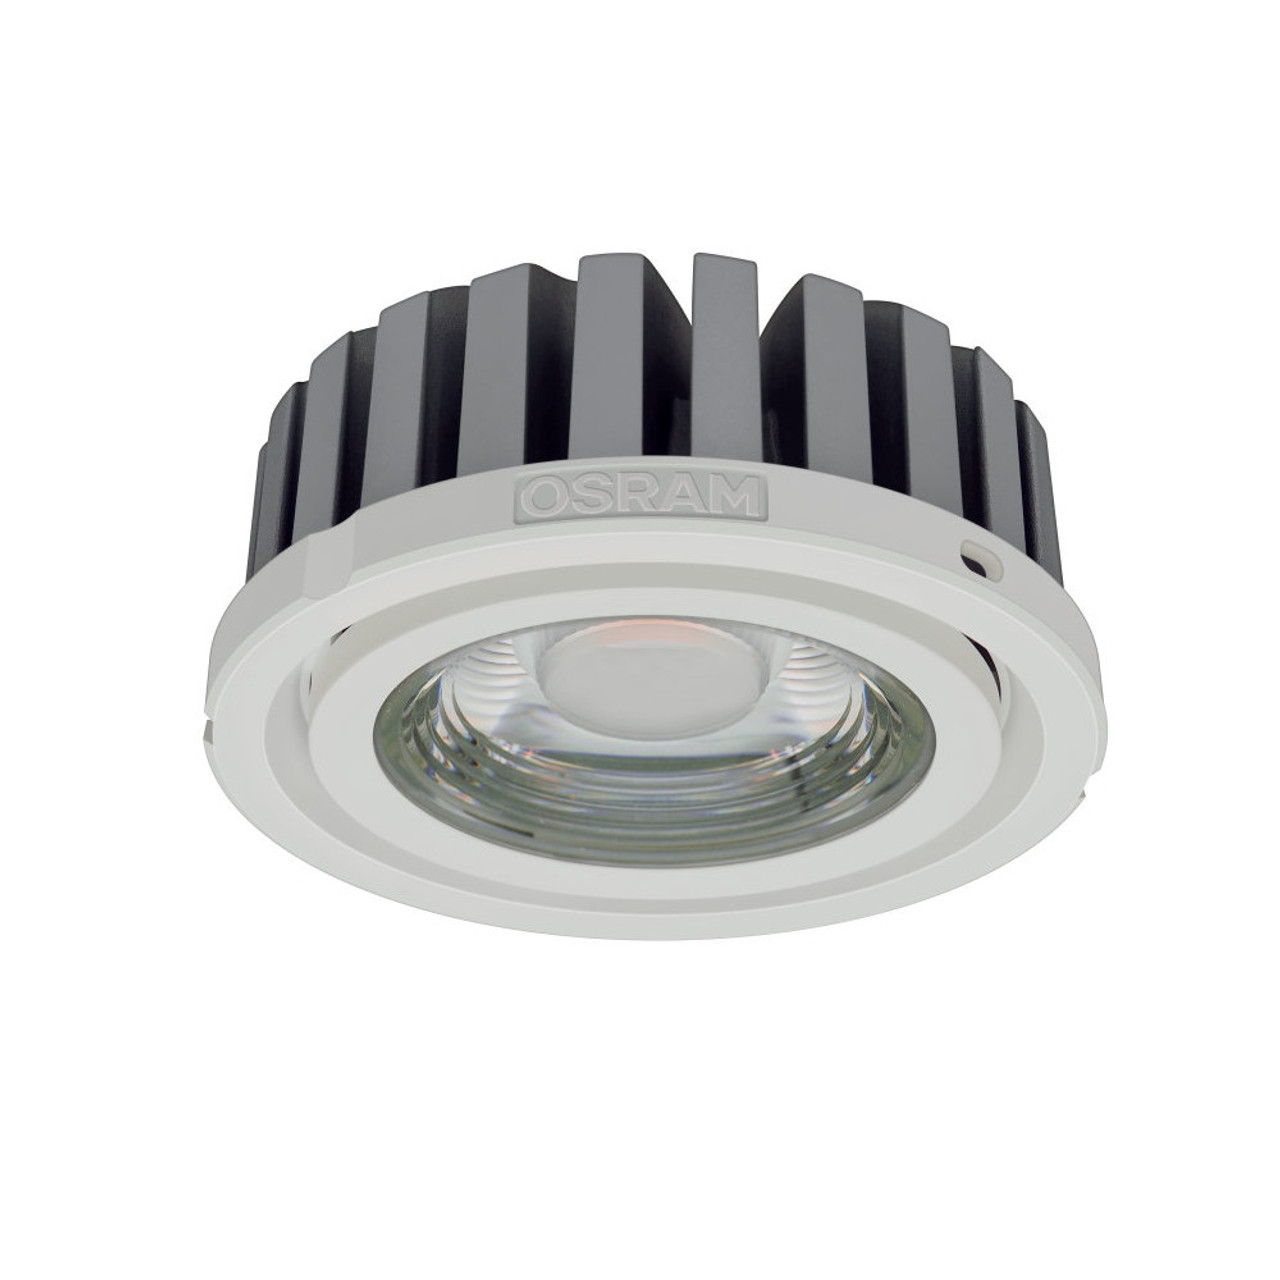 LED 700mA Constant Current 25.3W Dimmable 3500K CRi90 2300lm 24 degrees COB